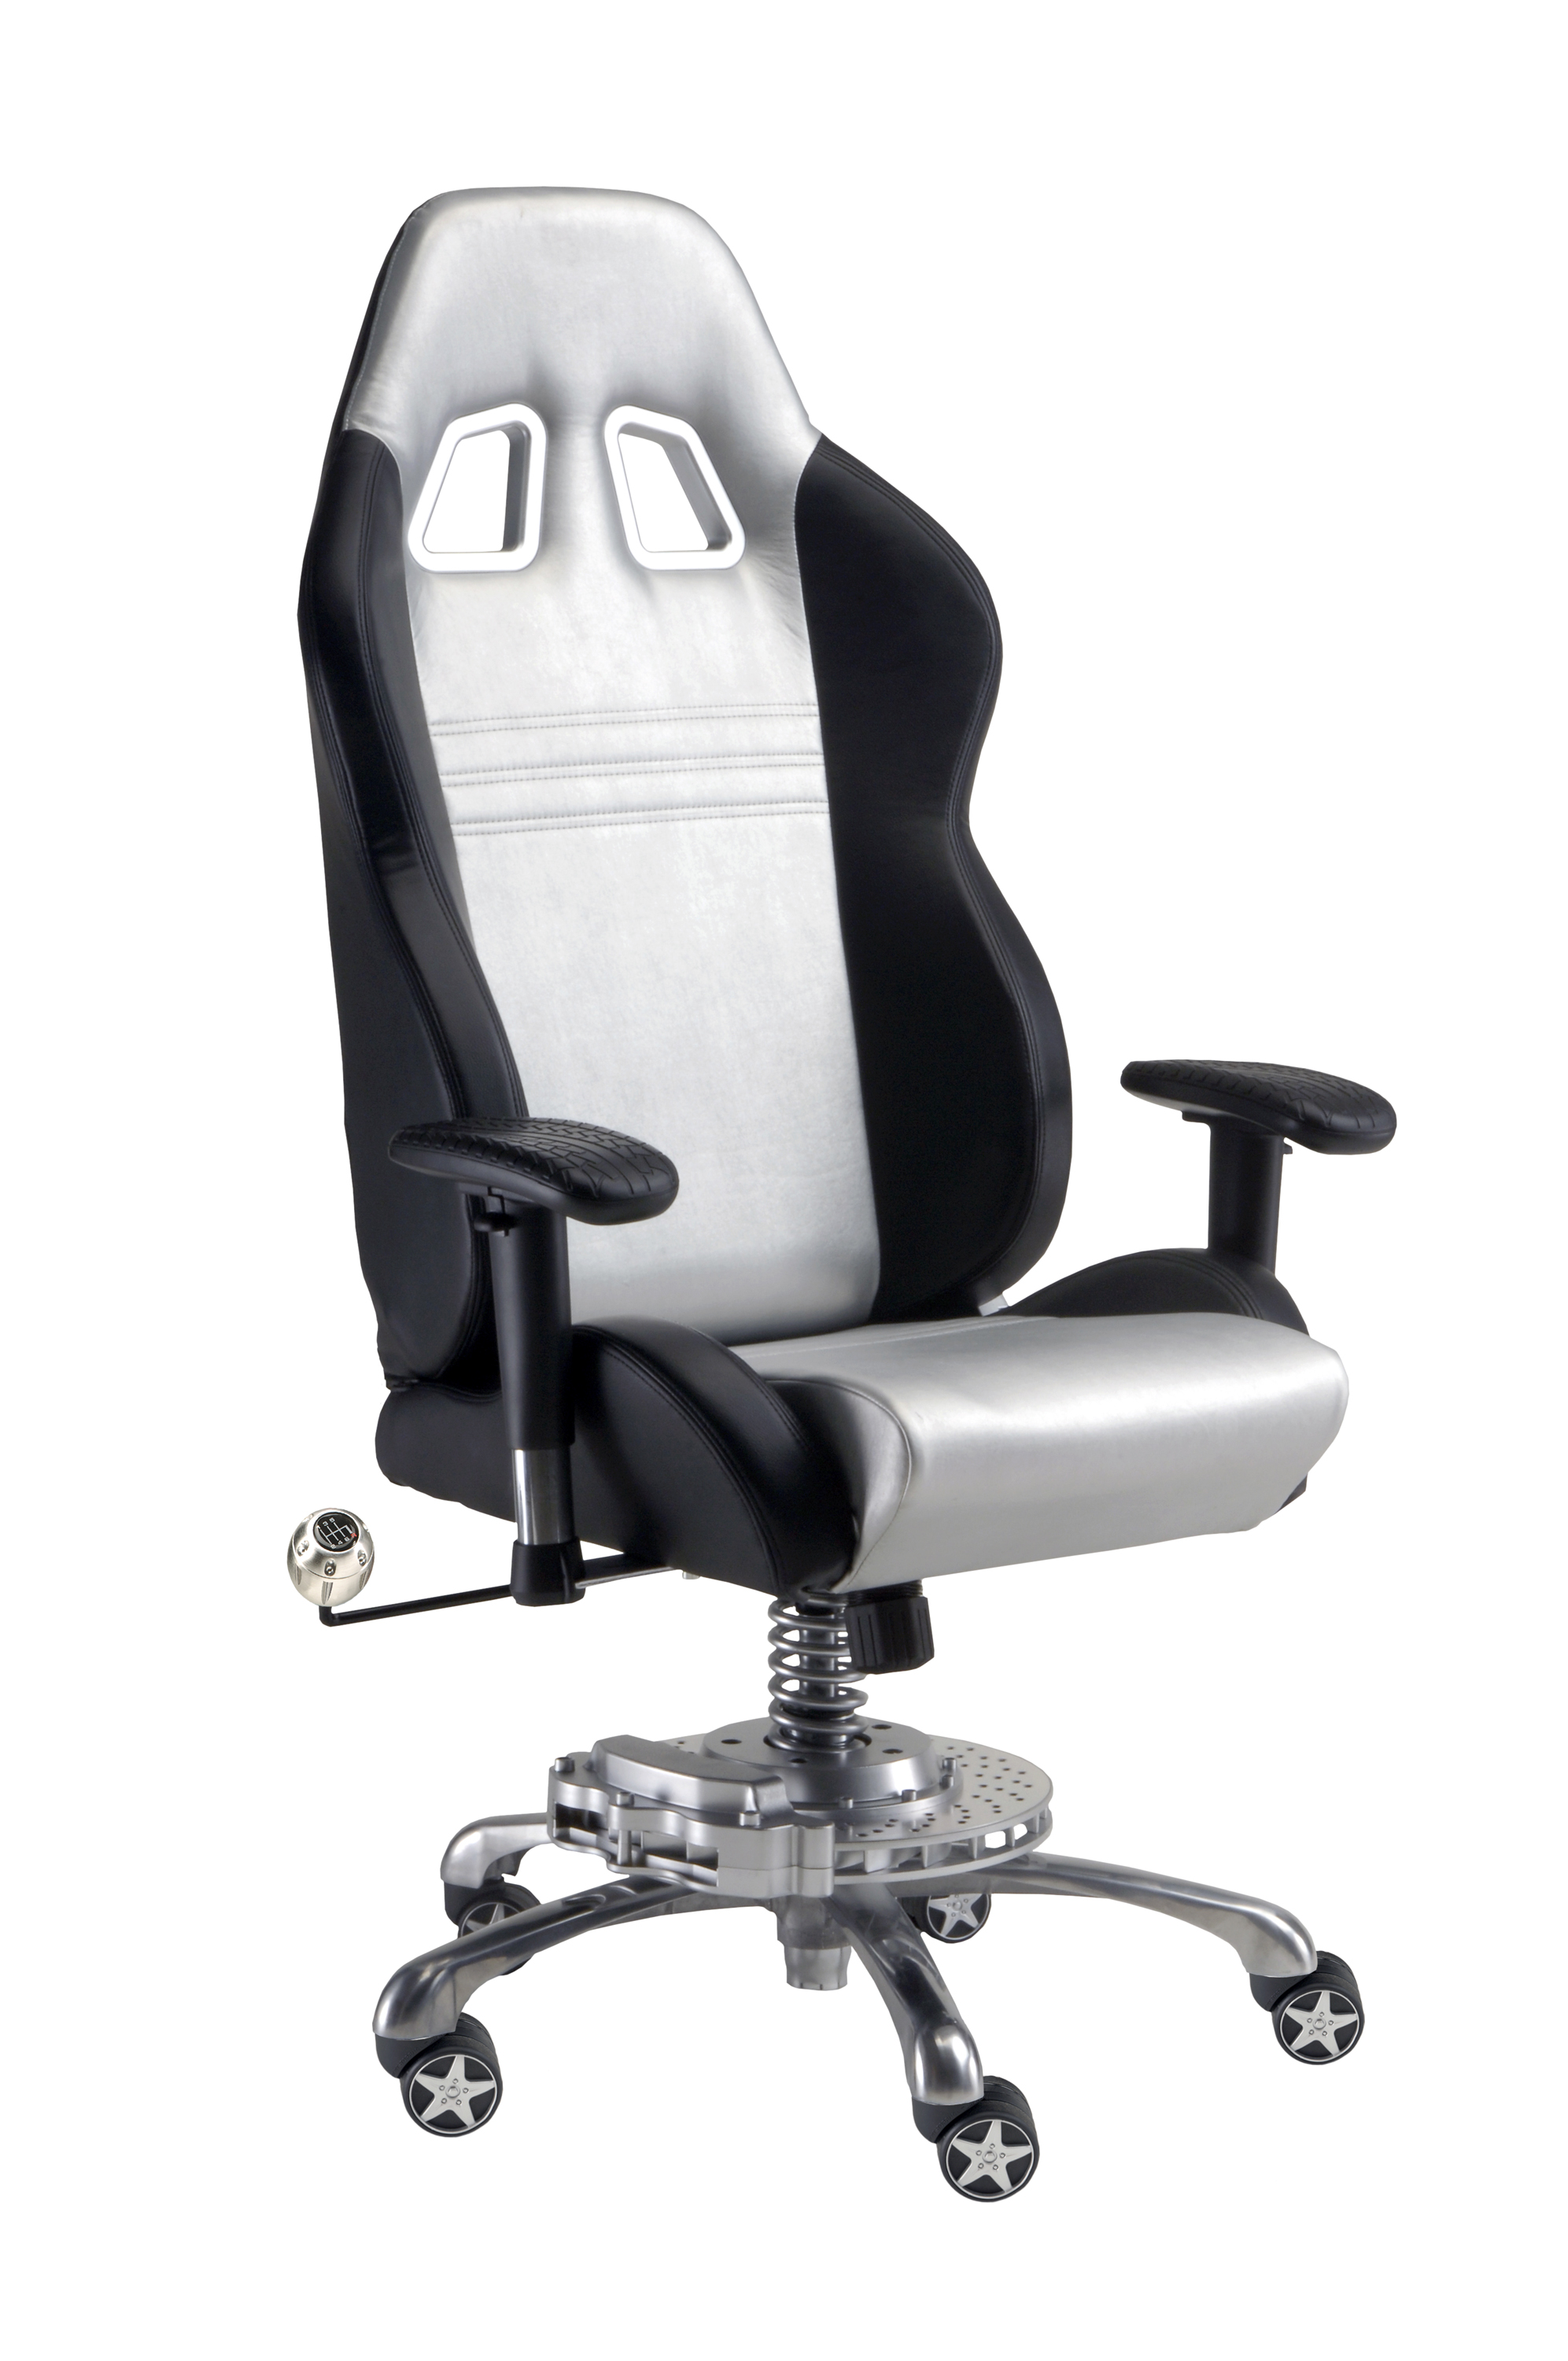 Intro-Tech Automotive, Pitstop Furniture, GP1000S Office Chair Silver, Desk Chair